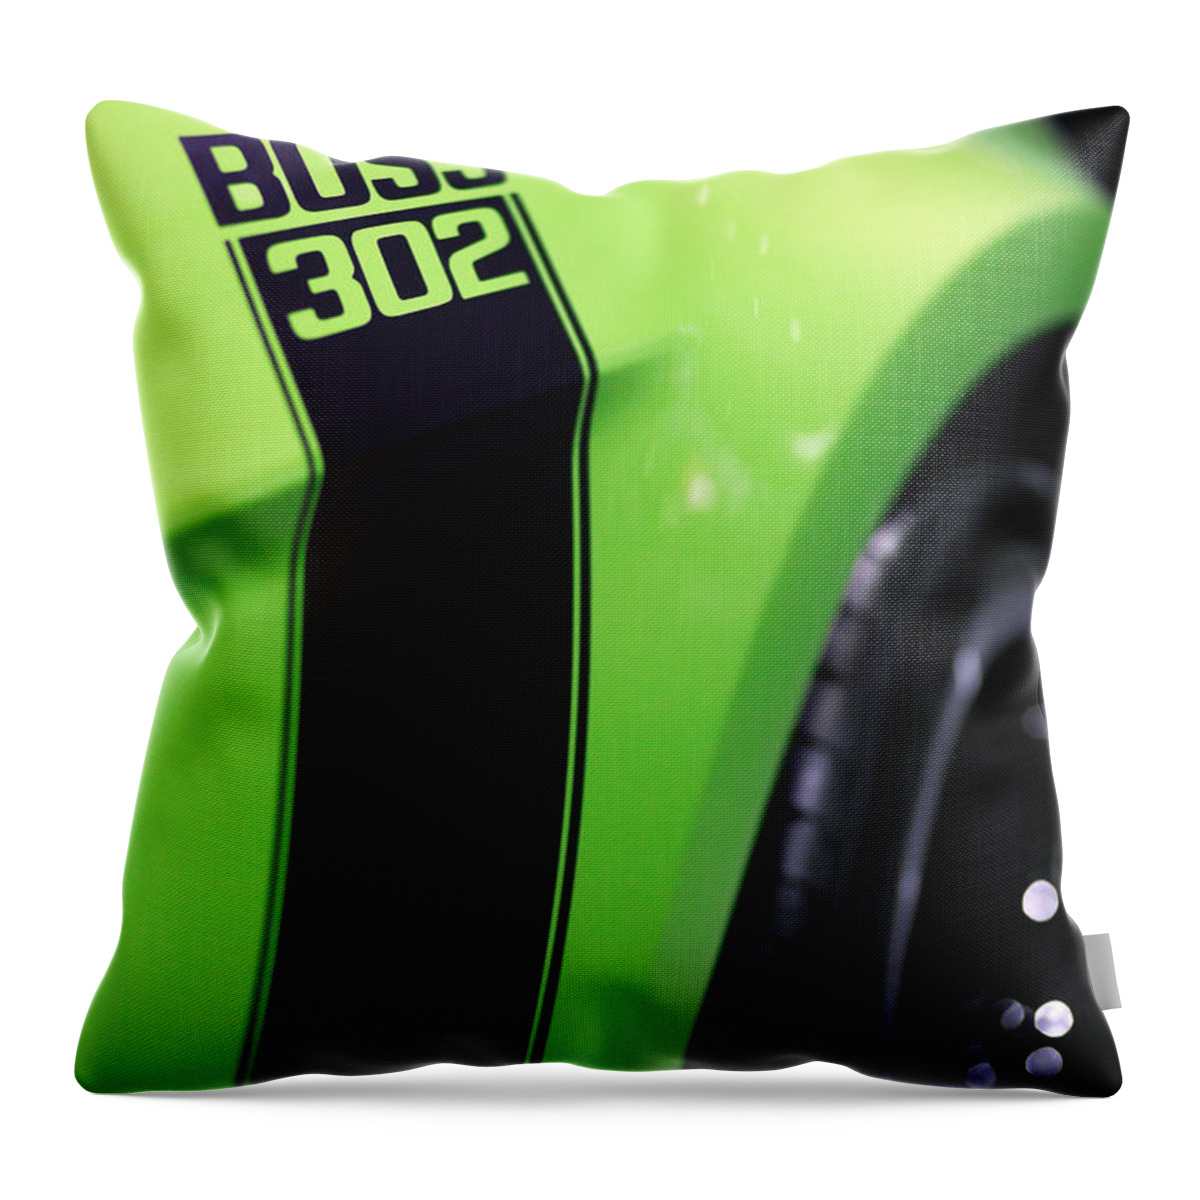 2011 Throw Pillow featuring the photograph Ford Mustang - BOSS 302 by Gordon Dean II